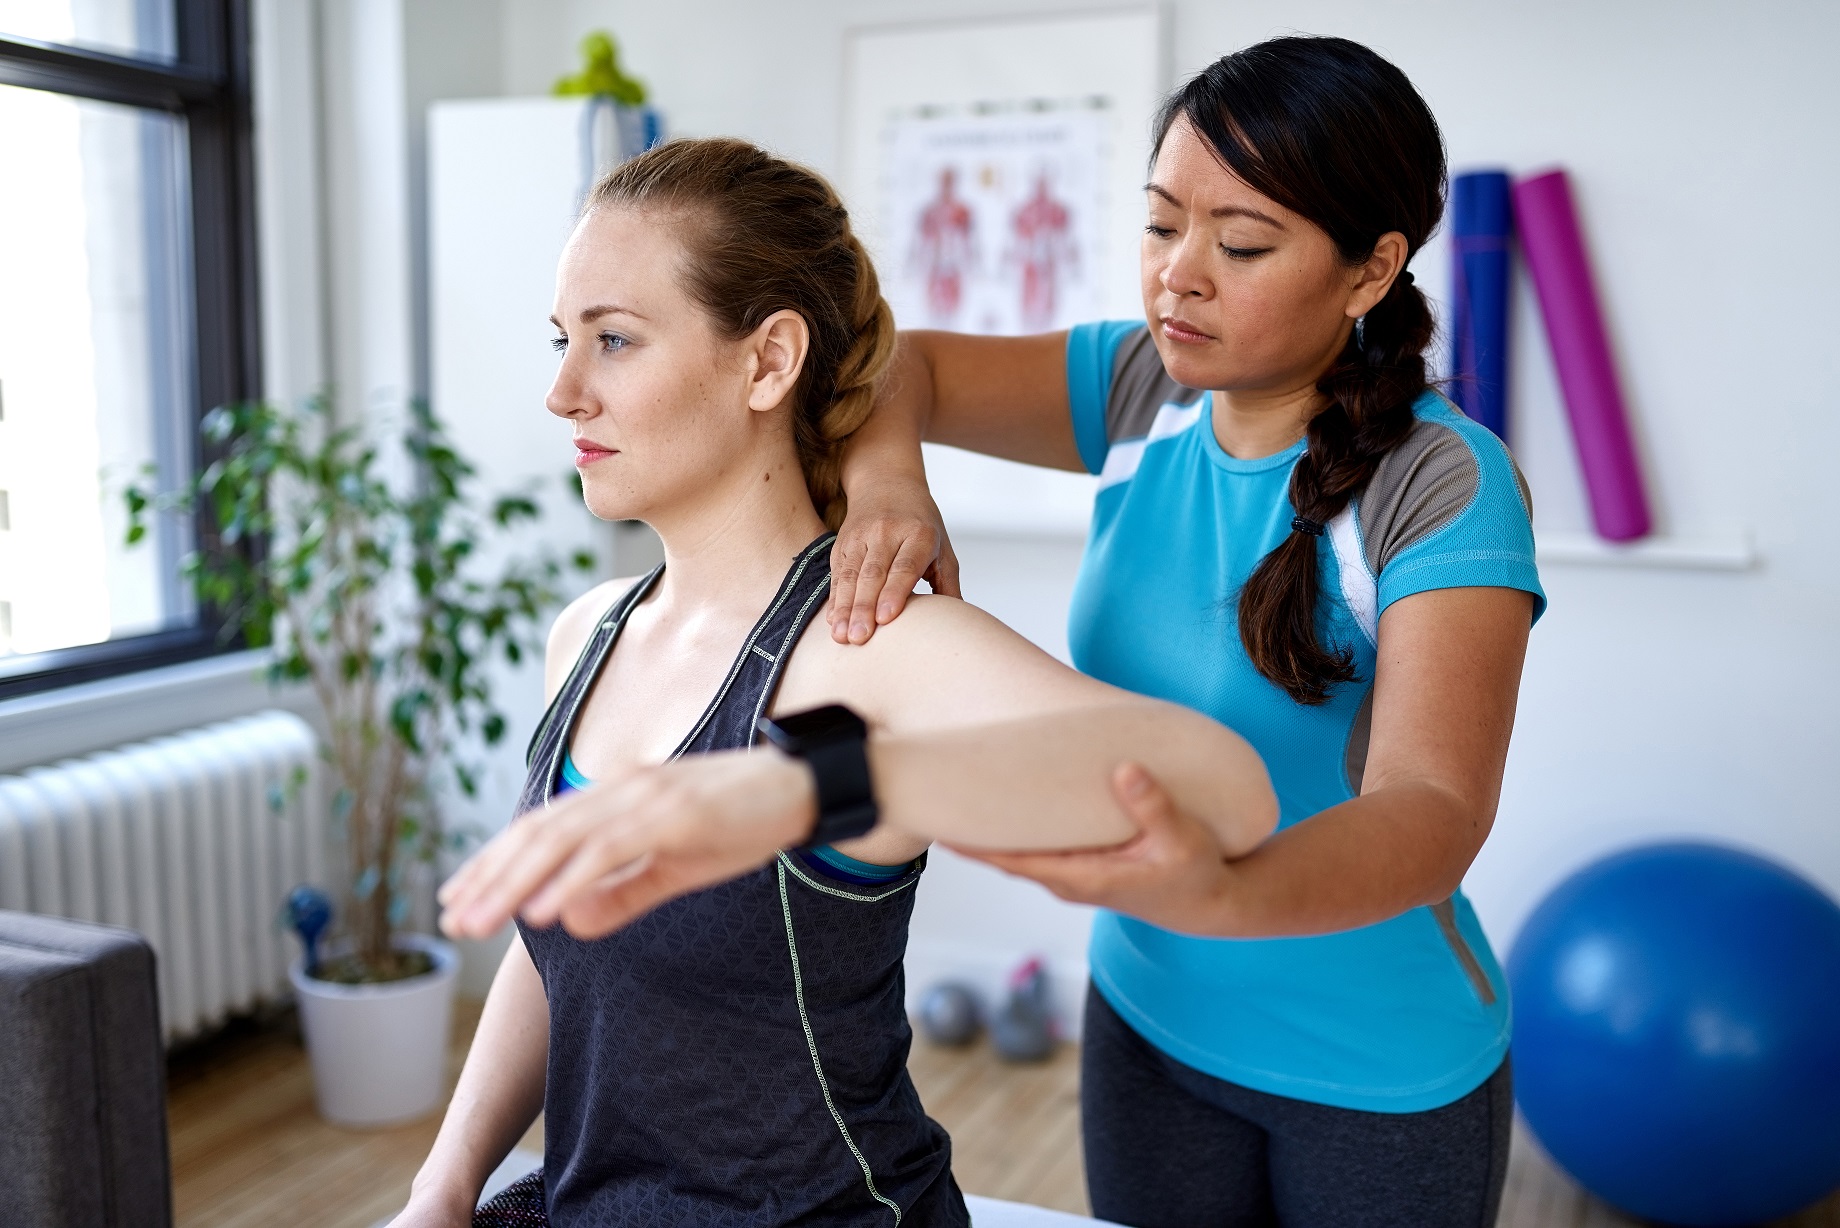 <strong>Physical Therapy Can Be Used to Improve Daily Life, Not Just Recuperation from Traumatic Injuries</strong> <br> <br> Physical Therapy isn’t just for people who need to learn to walk again, it can help people with acute or chronic pain, balance, and vertigo, headaches, concussion, jaw pain, incontinence, pain with intimacy, neurological disorders, or any physical problems limiting you from doing what you want to do. <br> <br> A lot of people don’t fully understand what physical therapy (and speech and occupational therapy) can do for them. Our goal is to get you out of our clinic as soon as possible so your condition has either resolved completely and/or you now have the tools to manage it well without us! <br> <br> <em> - u/mydogisthedawg </em>